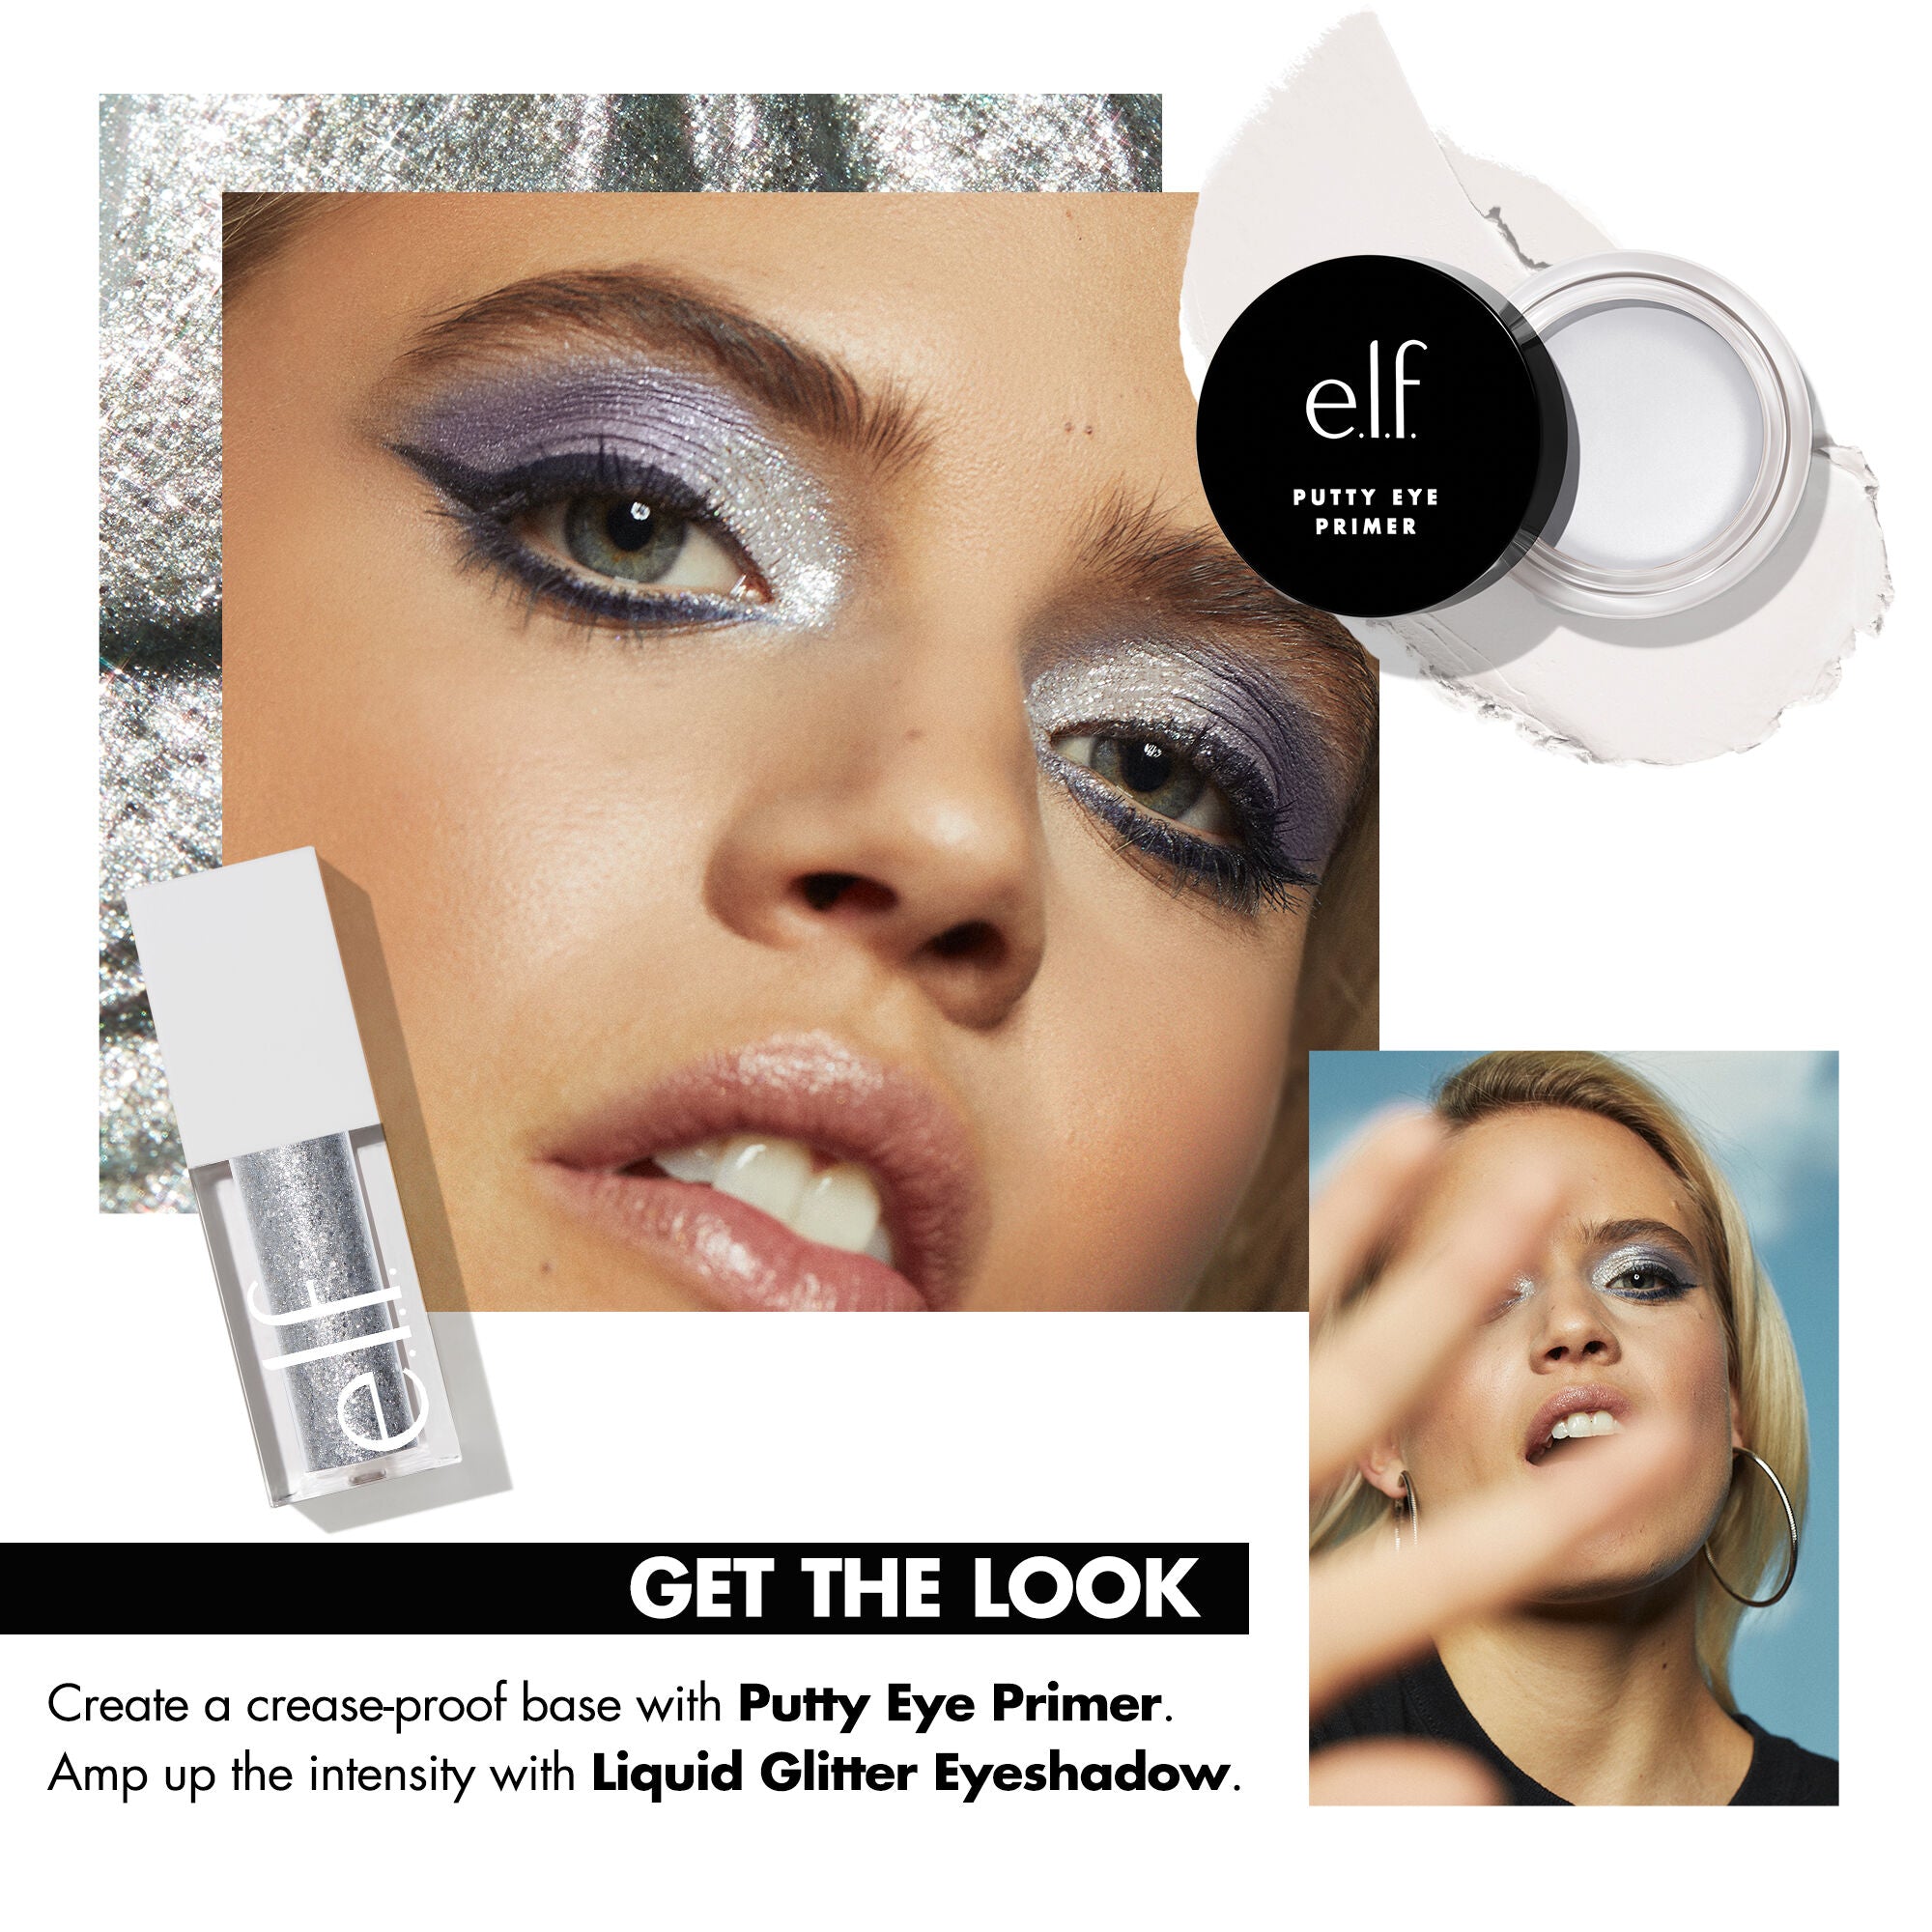 How to use elf Putty Eye Primer - White